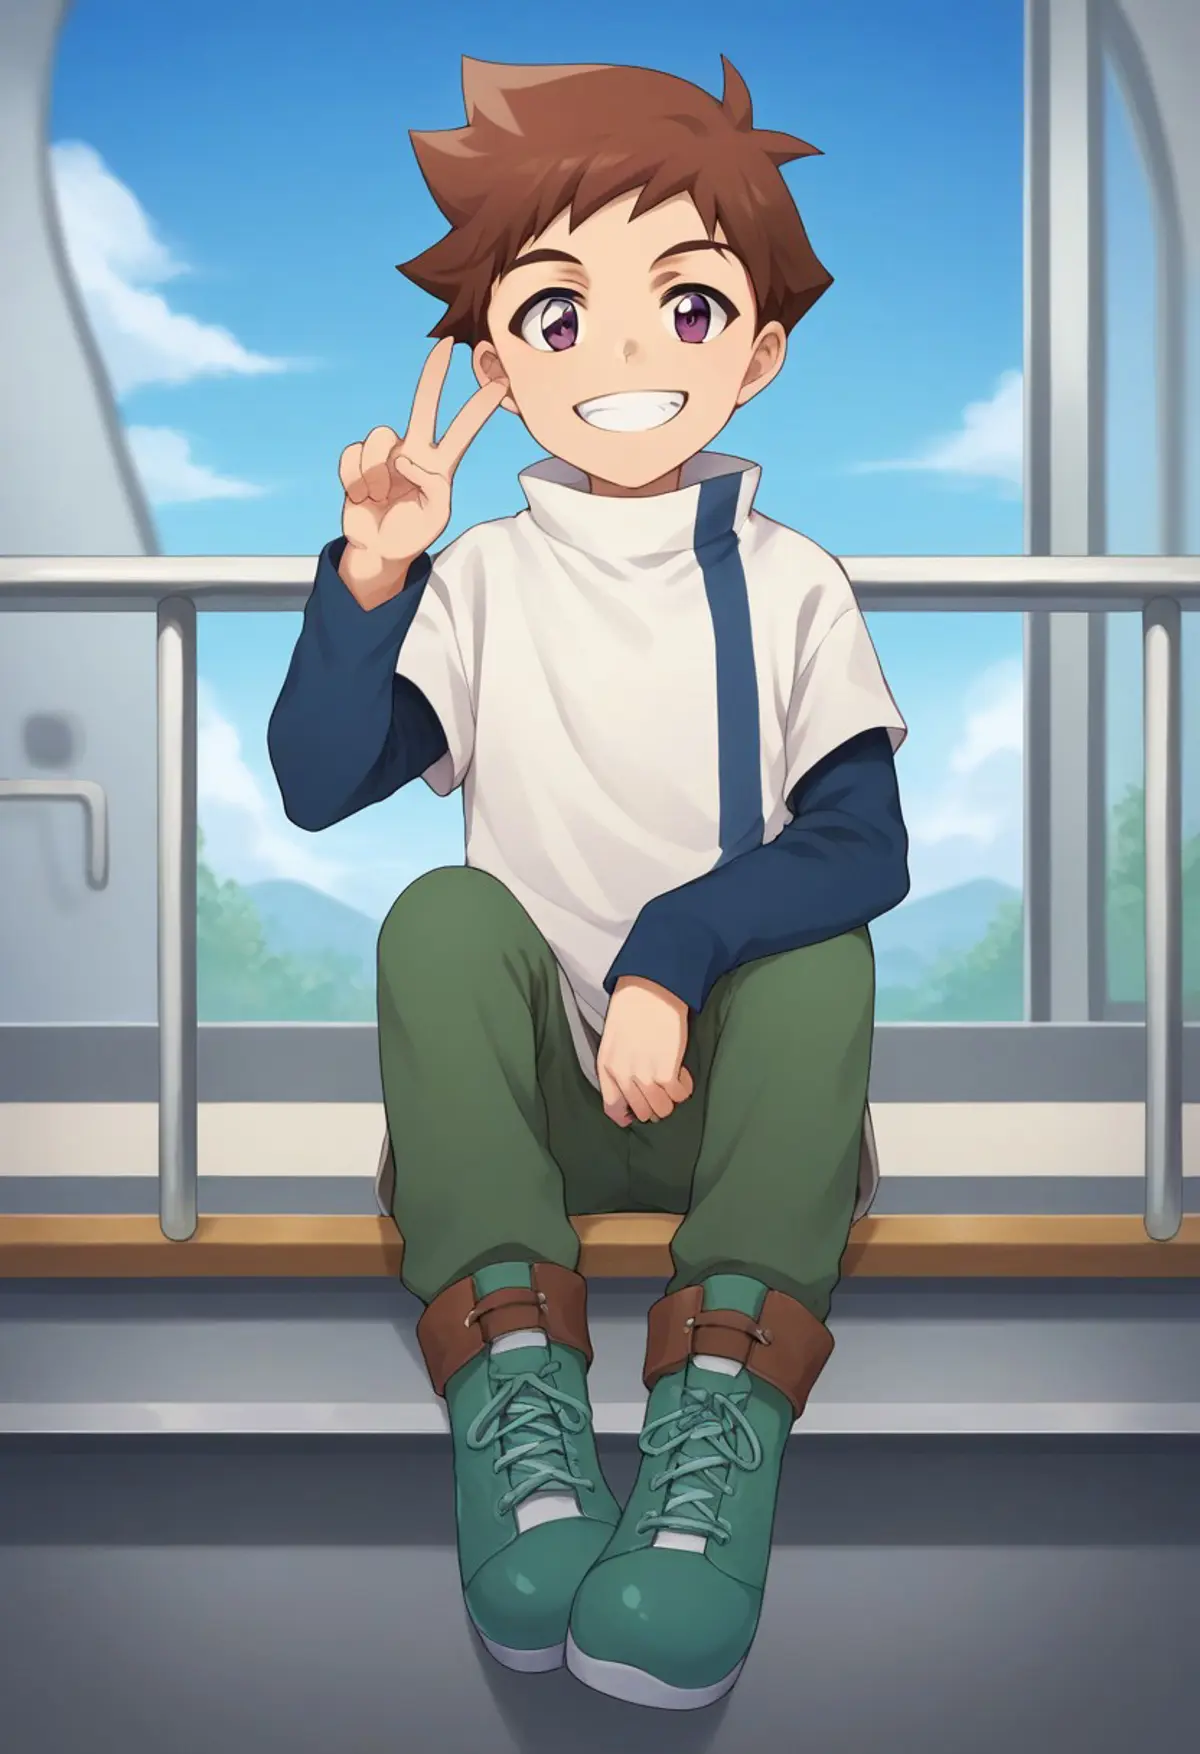 A young boy with brown hair and purple eyes is seated on a balcony railing making a peace sign with his right hand while smiling broadly. He is dressed casually in a white short sleeve shirt with a high collar over a blue long sleeve shirt, green pants, and teal boots. 